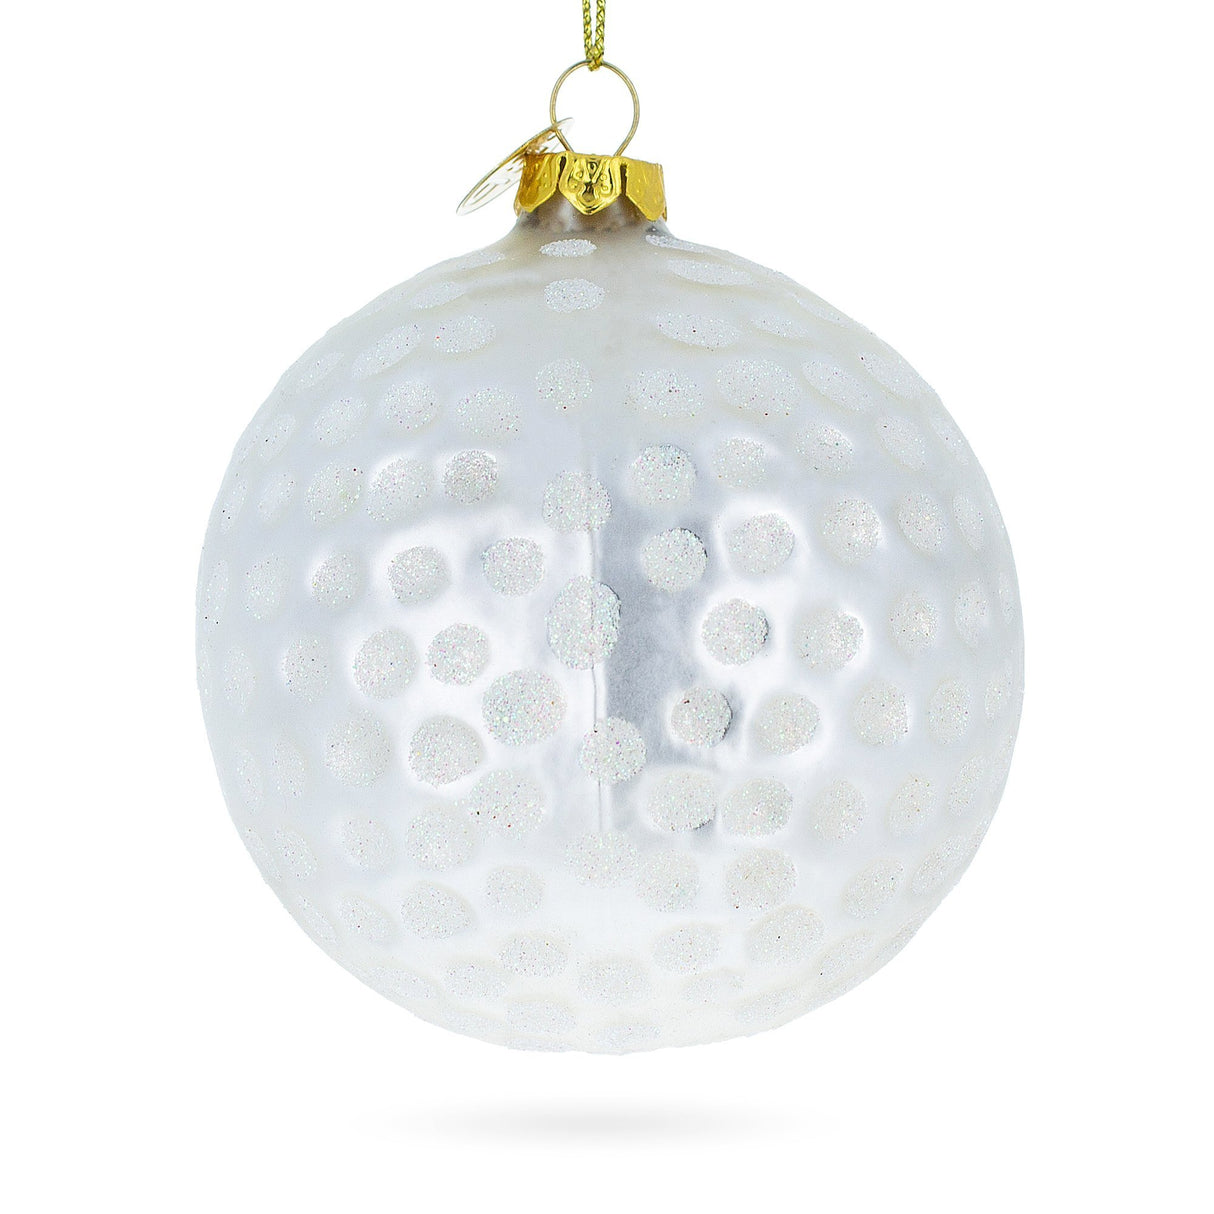 Glass Textured Golf Ball - Blown Glass Christmas Ornament in White color Round